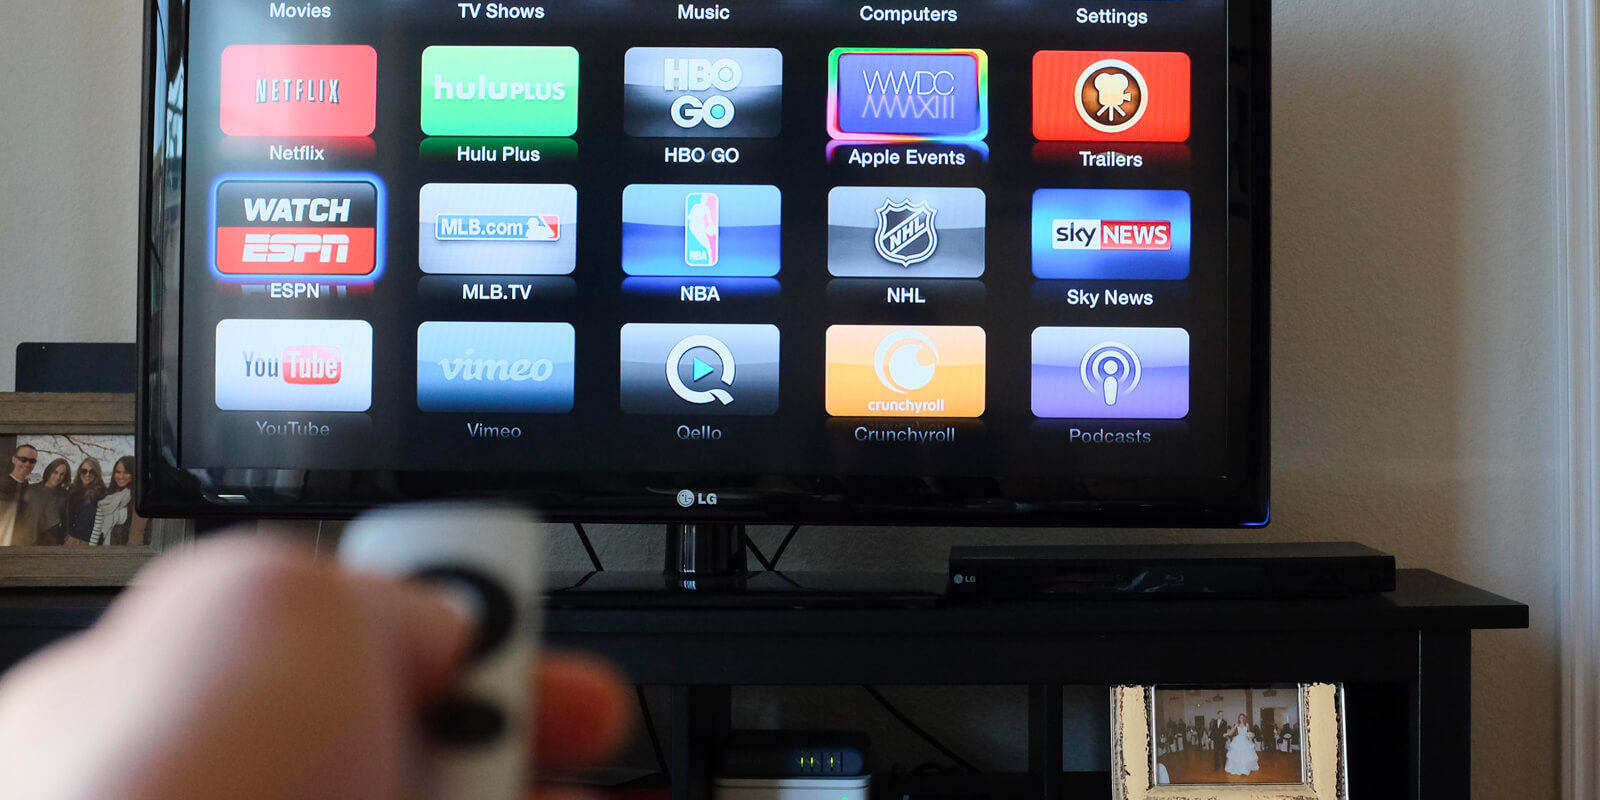 7 best ways of how to turn volume up on Vizio TV with only one button